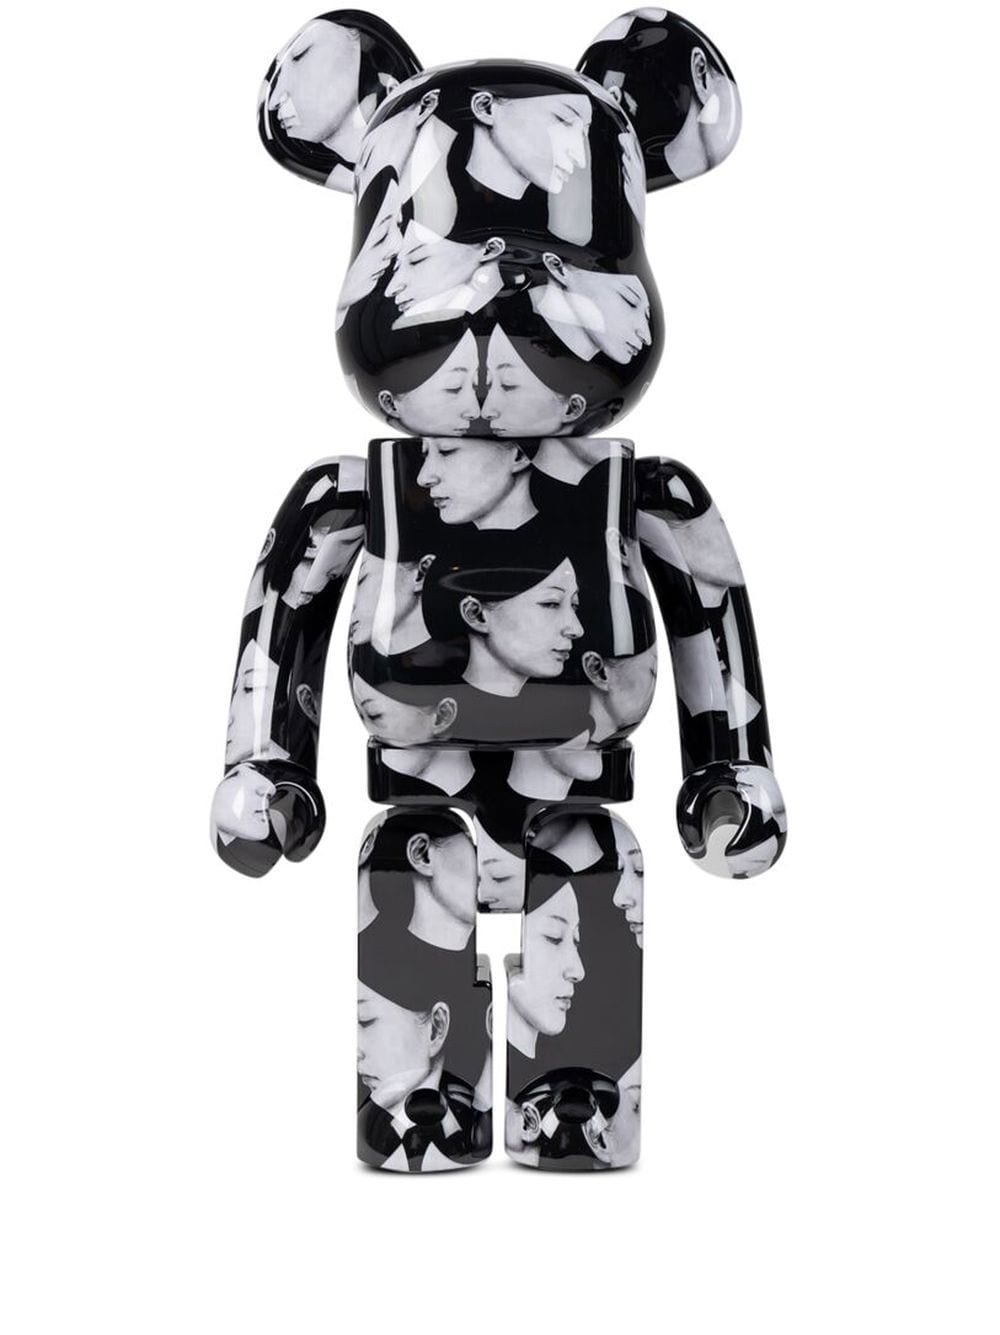 Medicom Toy X Suzume Uchida Until I Want To Be 1000% Be@rbrick 模型玩具 In Black